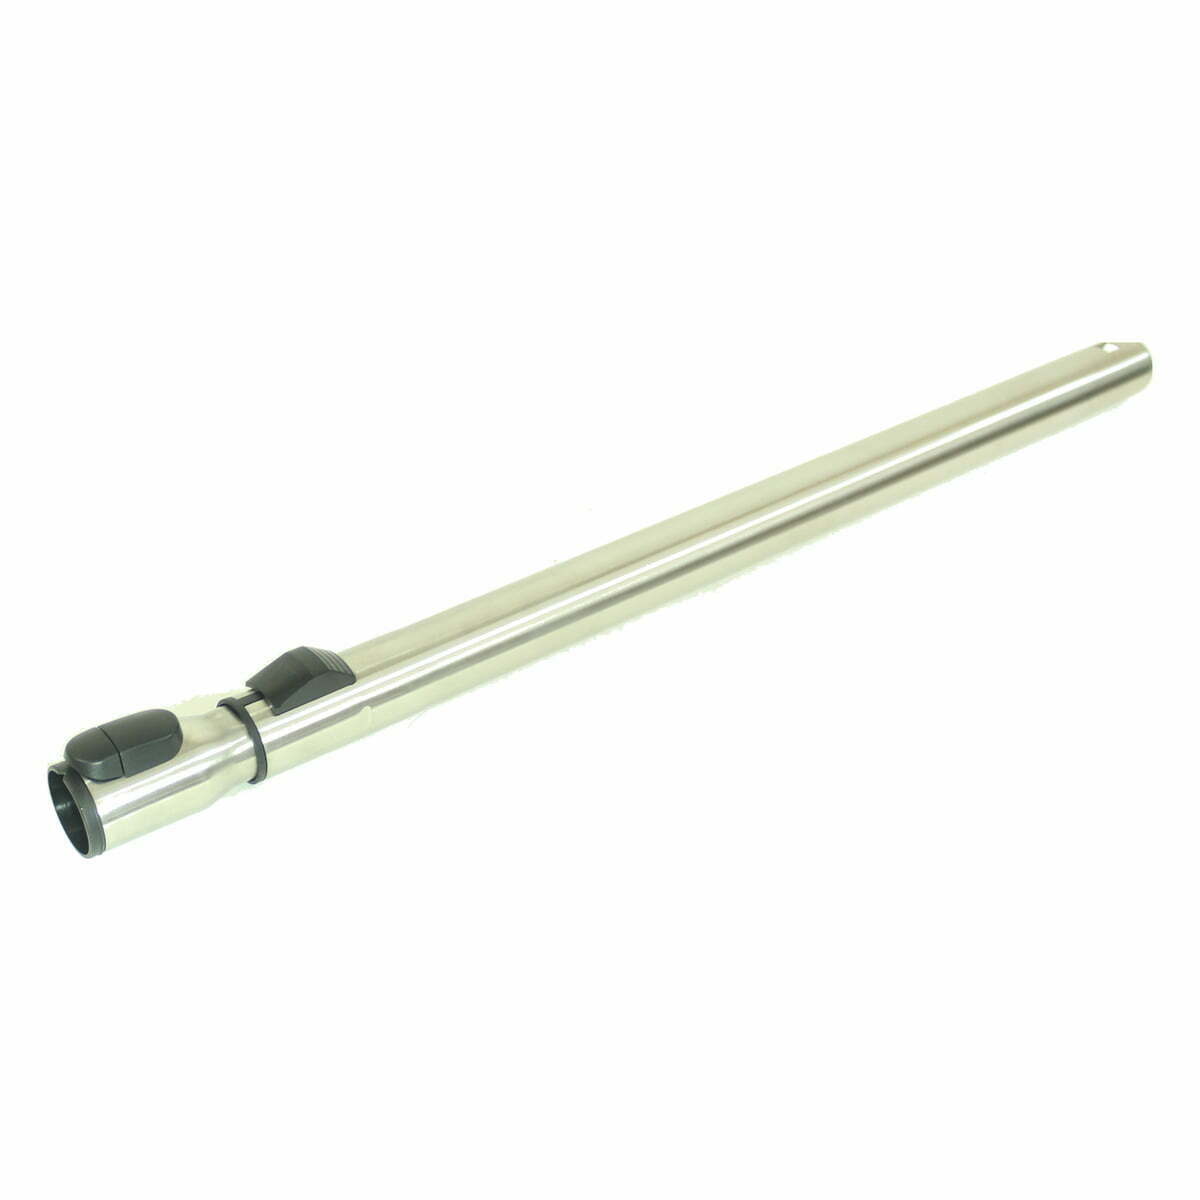 https://www.vacuumsrus.com/wp-content/uploads/2021/10/aftermarket-miele-telescopic-wand-for-non-electric-canisters.jpg